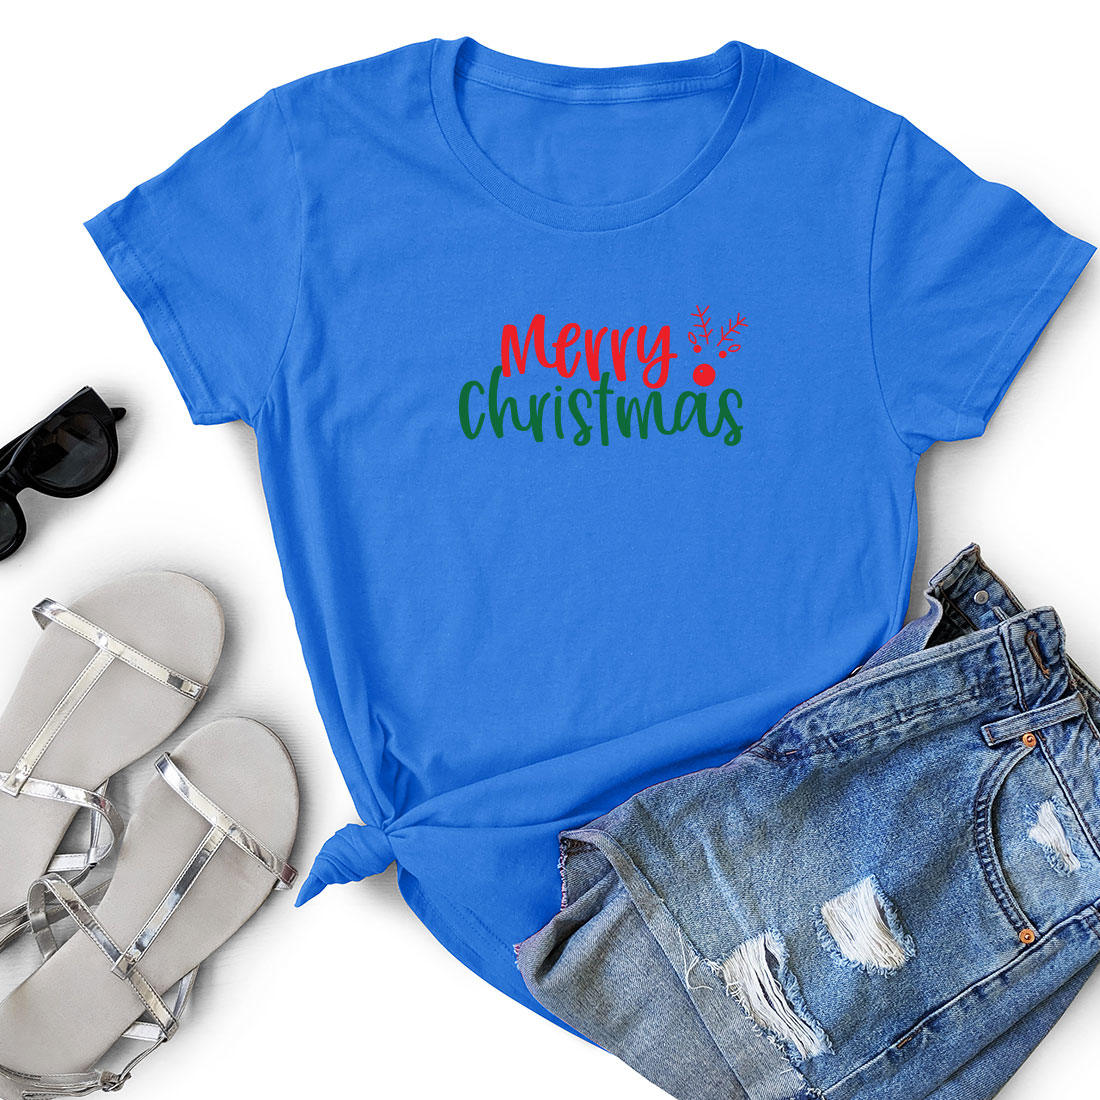 T - shirt that says merry christmas next to a pair of shorts.